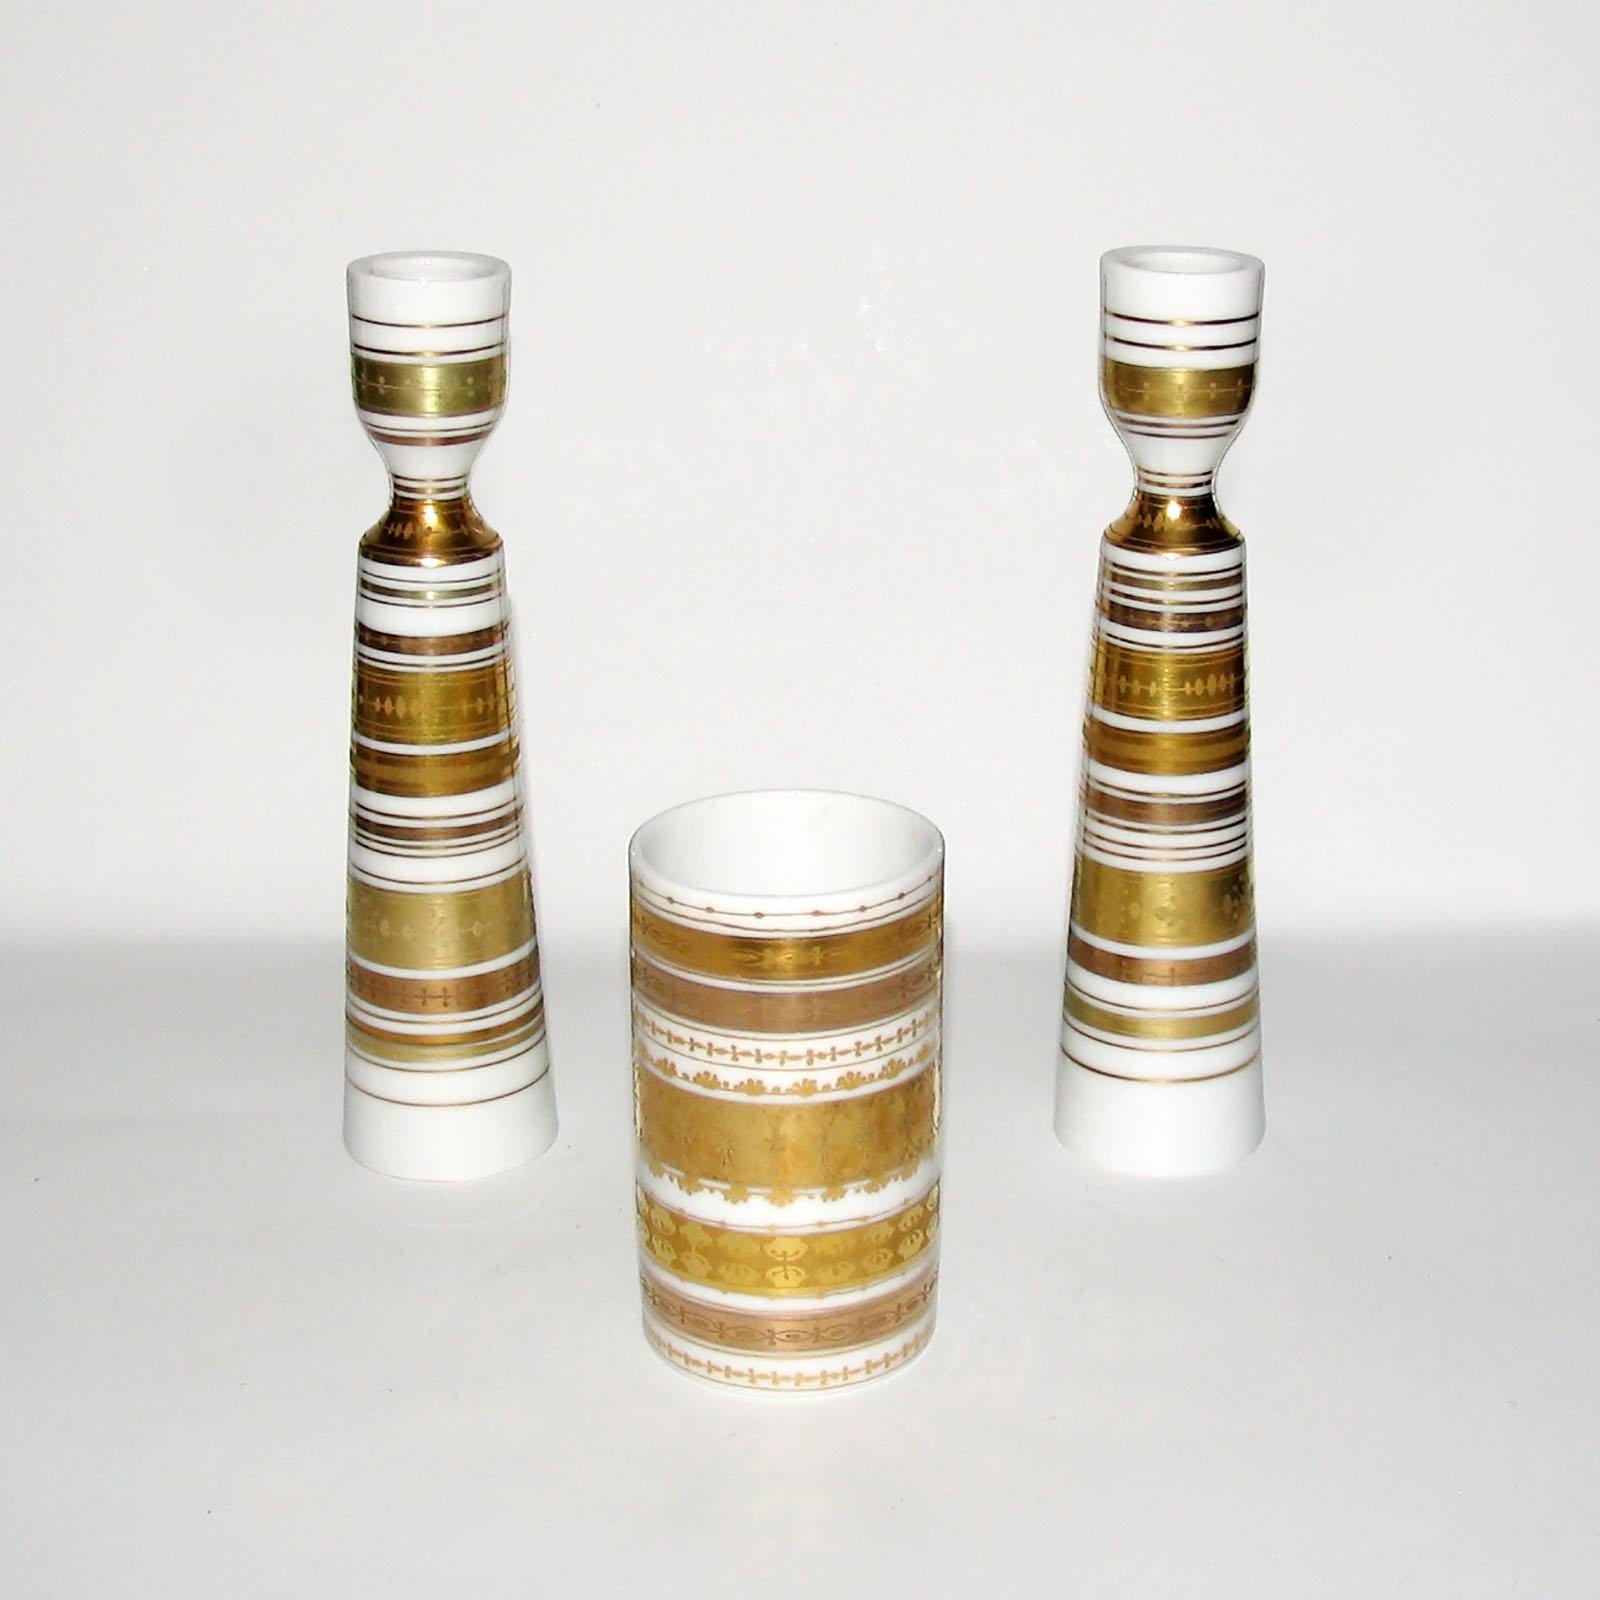 Late 20th Century Mid-Century Modern, Rosenthal Porcelain Candlesticks and Vase by Bjorn Wiinblad